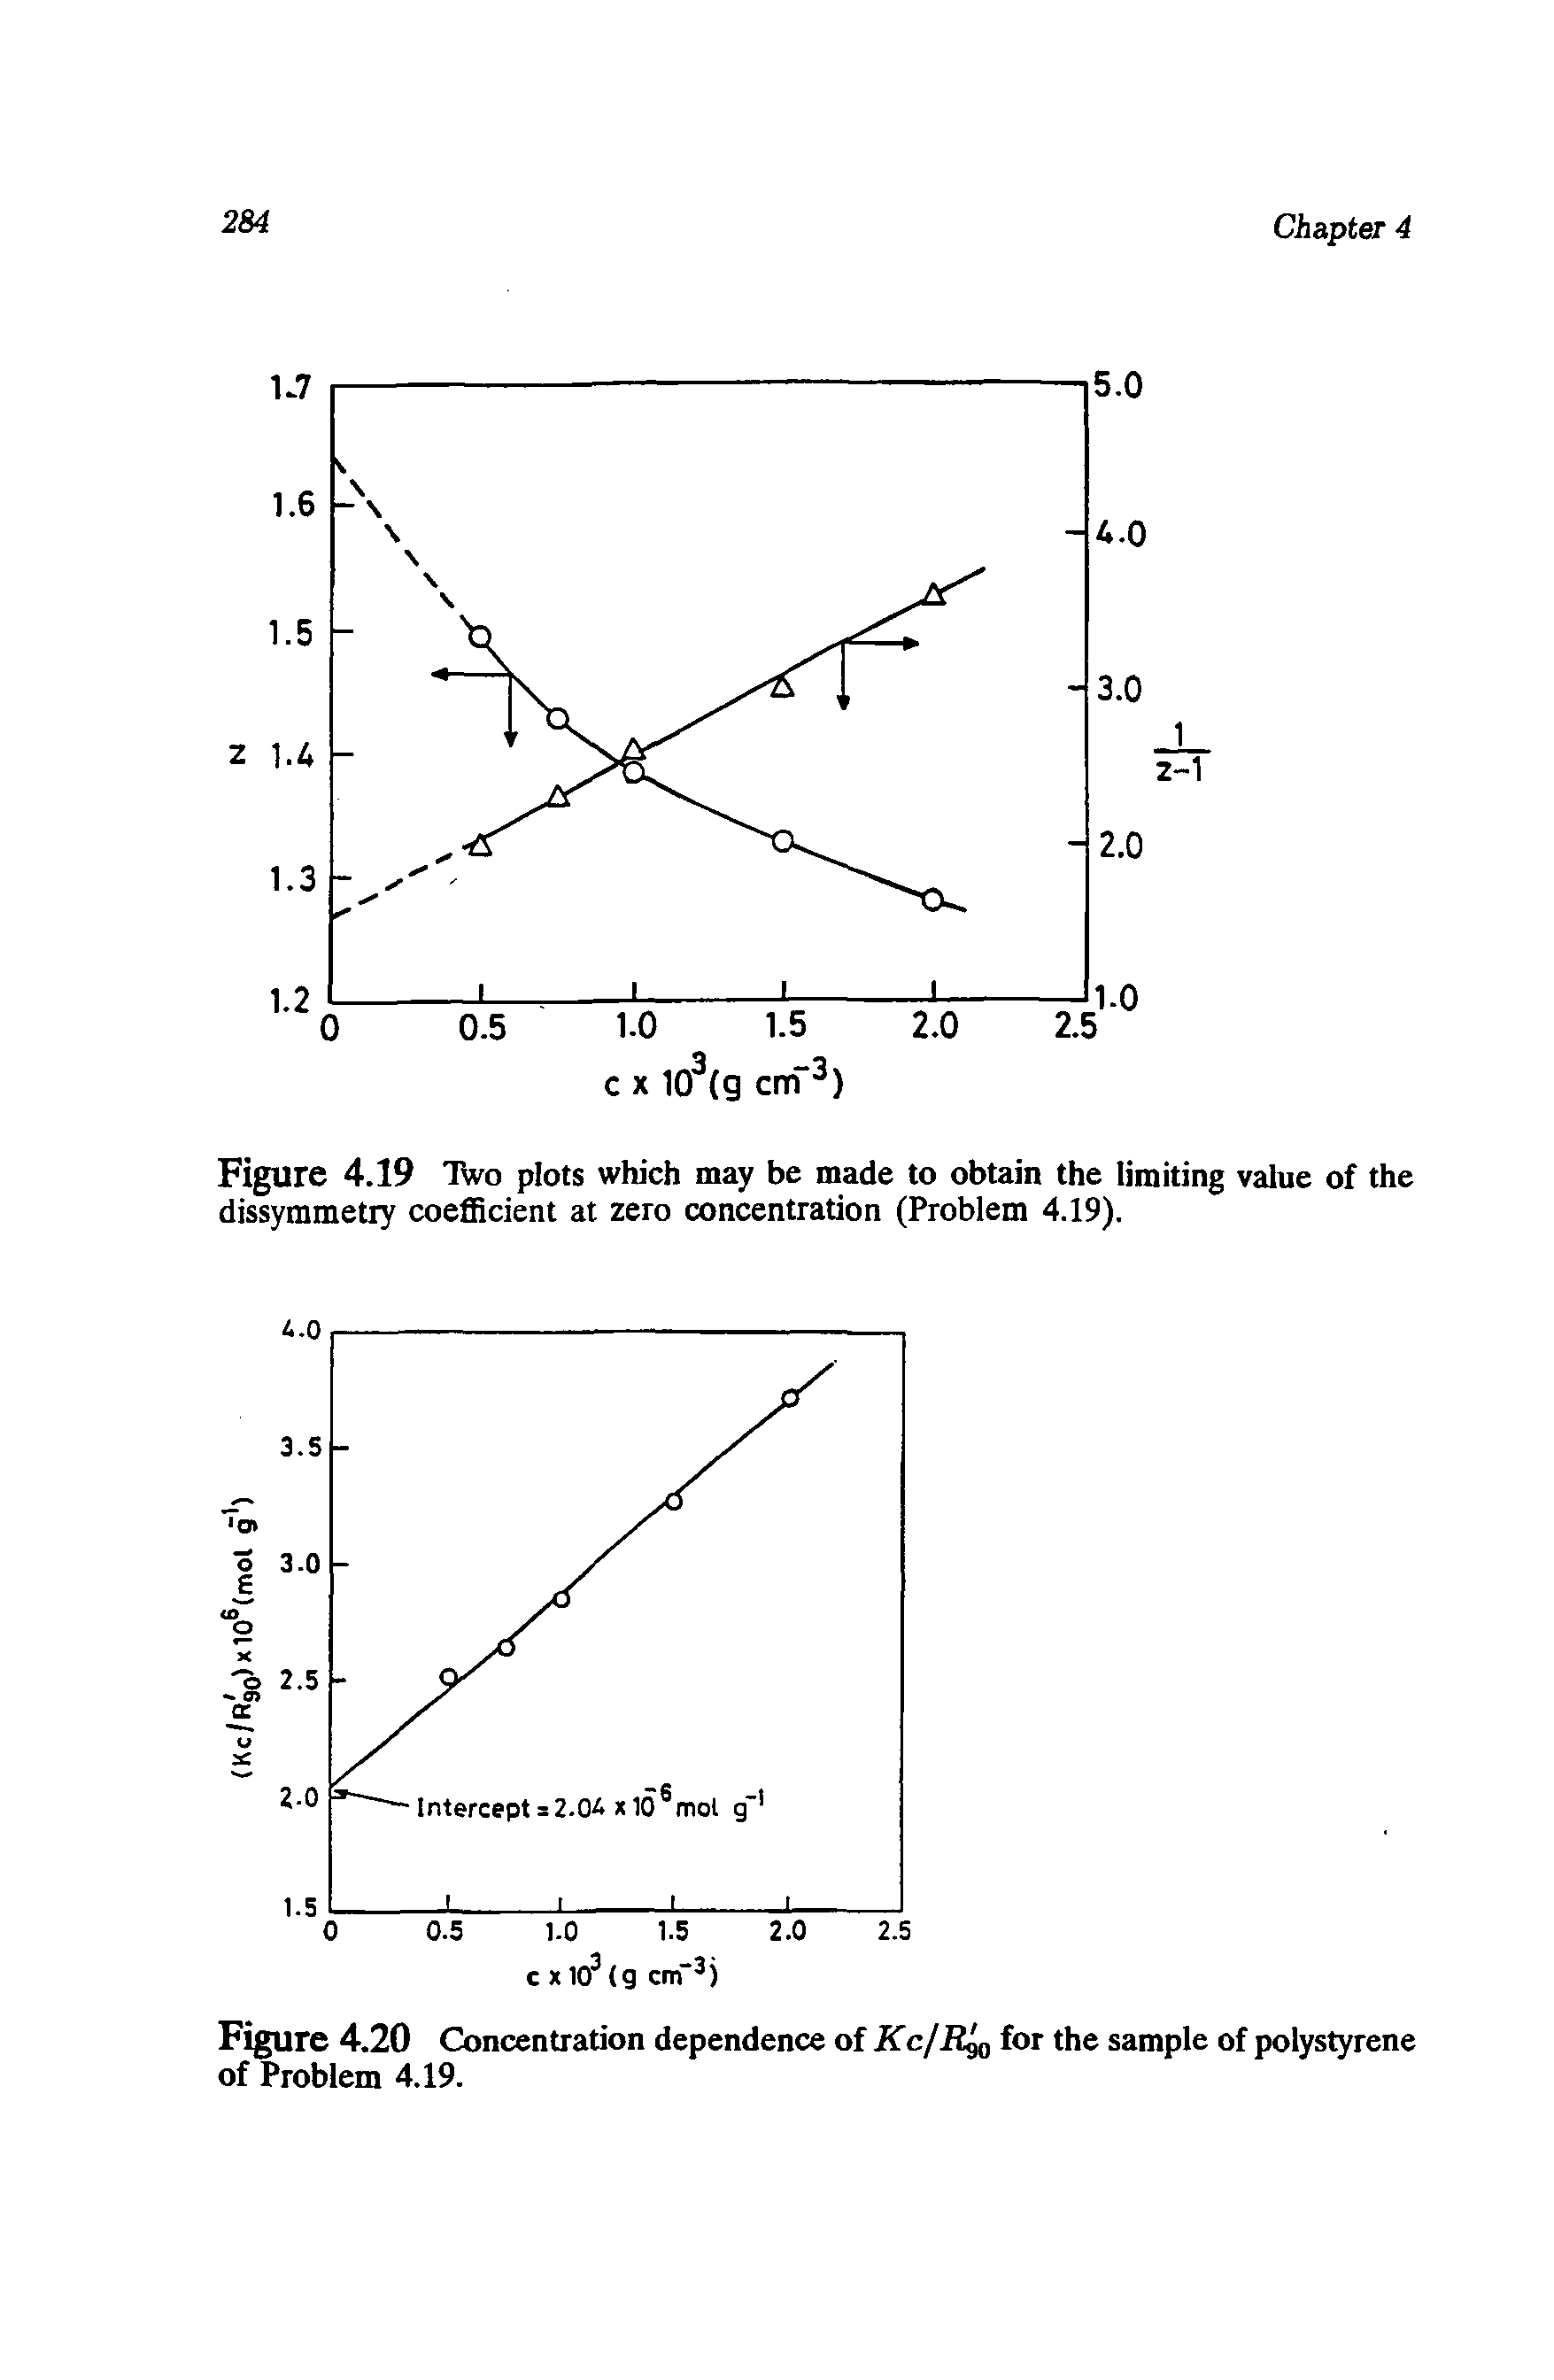 Figure 4.19 IVo plots which may be made to obtain the limiting value of the dissymmetry coeflBcient at zero concentration (Problem 4.19).